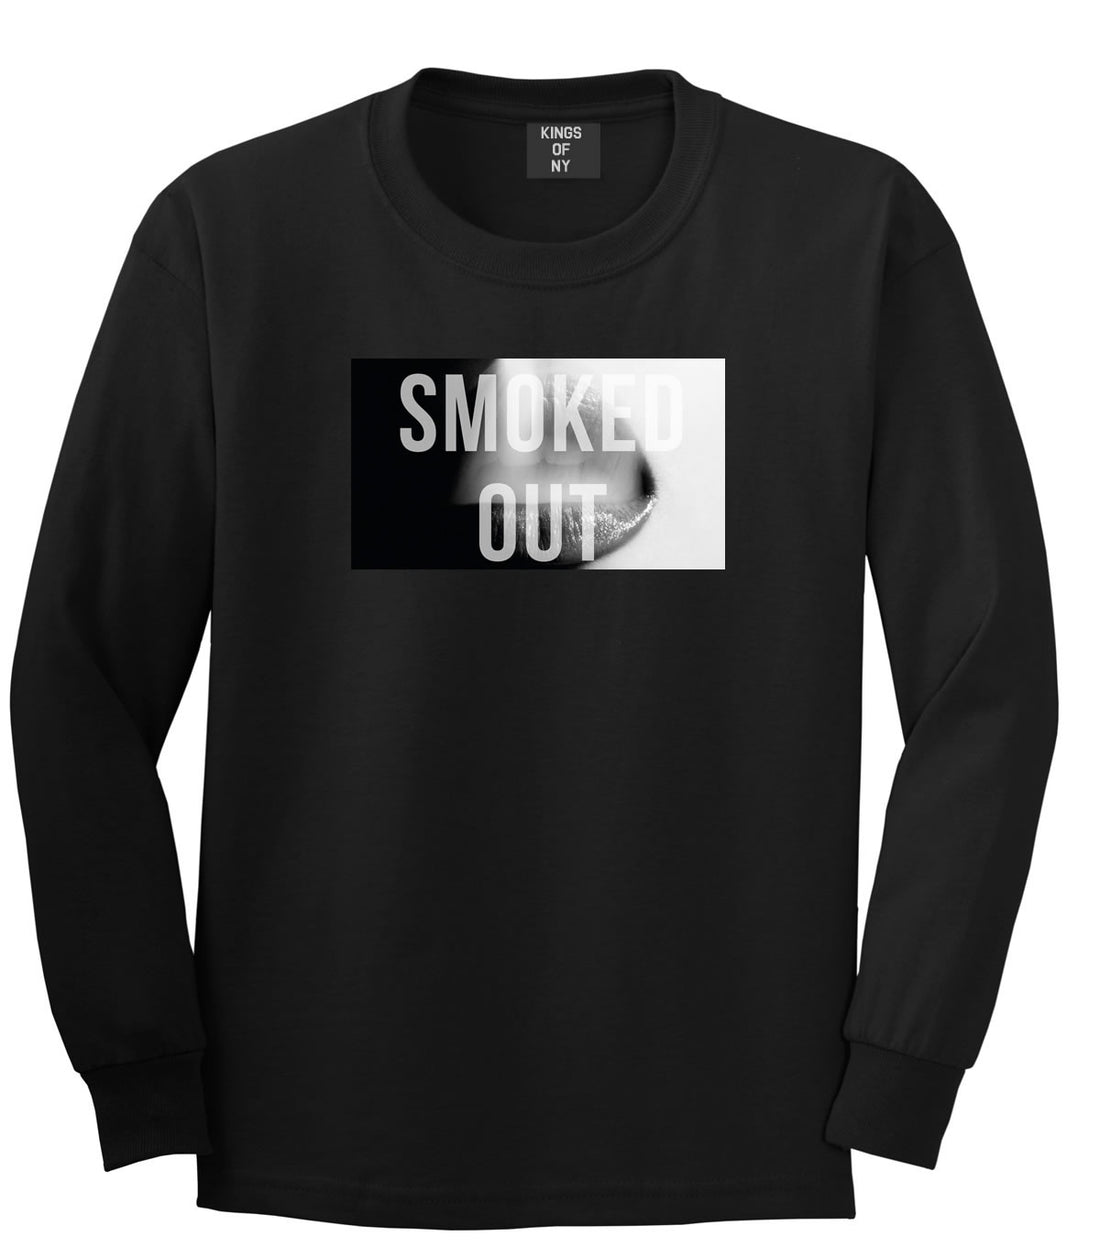 Smoked Out Weed Marijuana Girls Pot New York Long Sleeve T-Shirt In Black by Kings Of NY